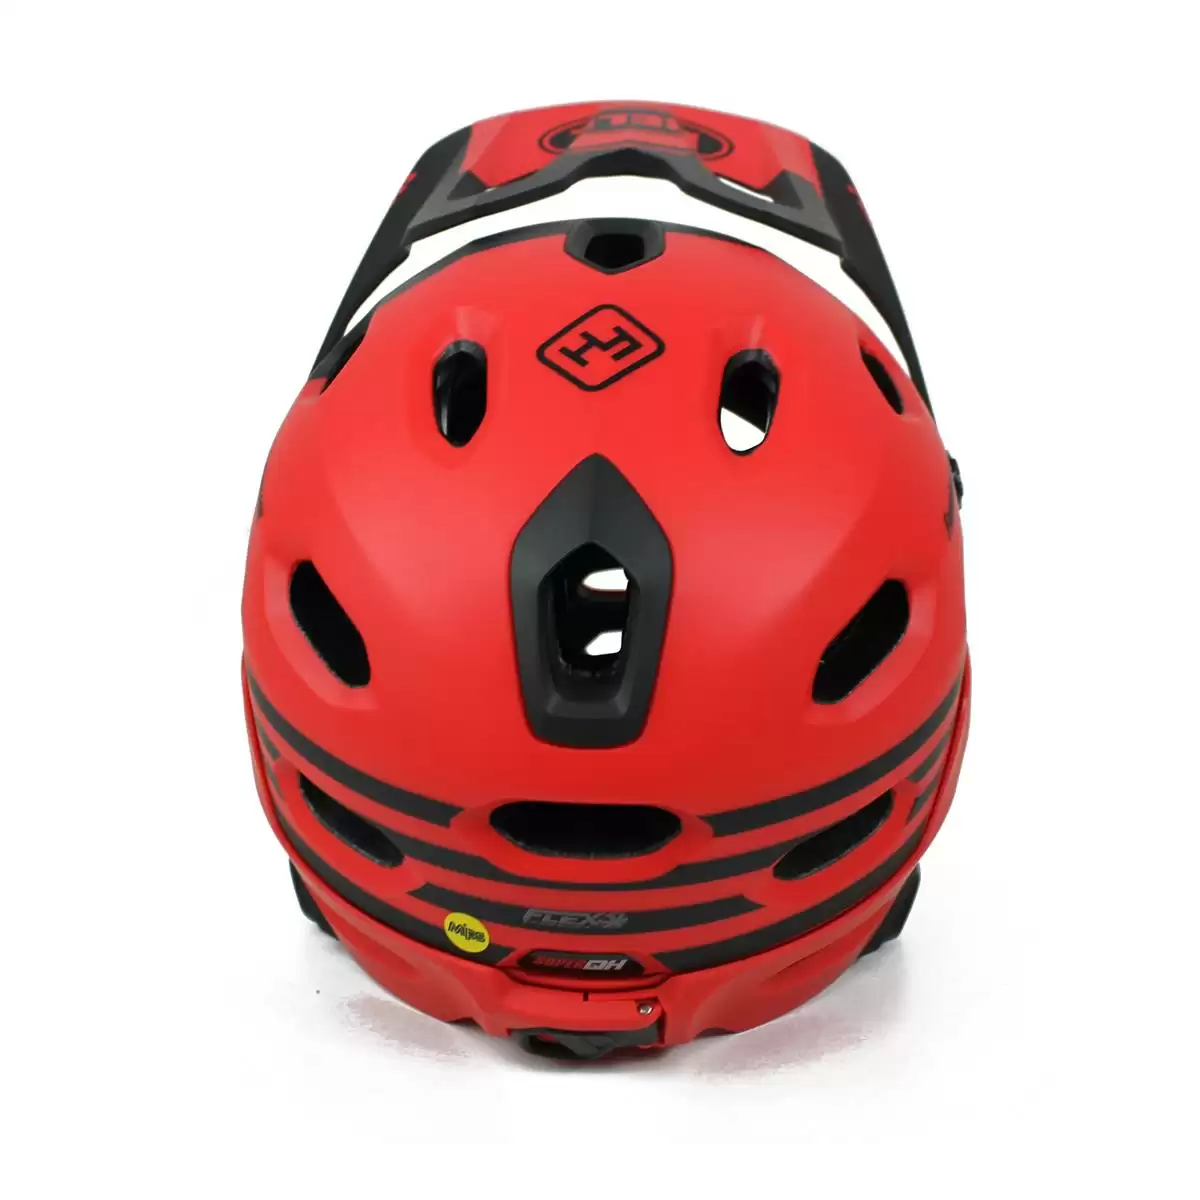 Helm Super DH MIPS Fasthouse Rot Größe S (52-56cm) #6